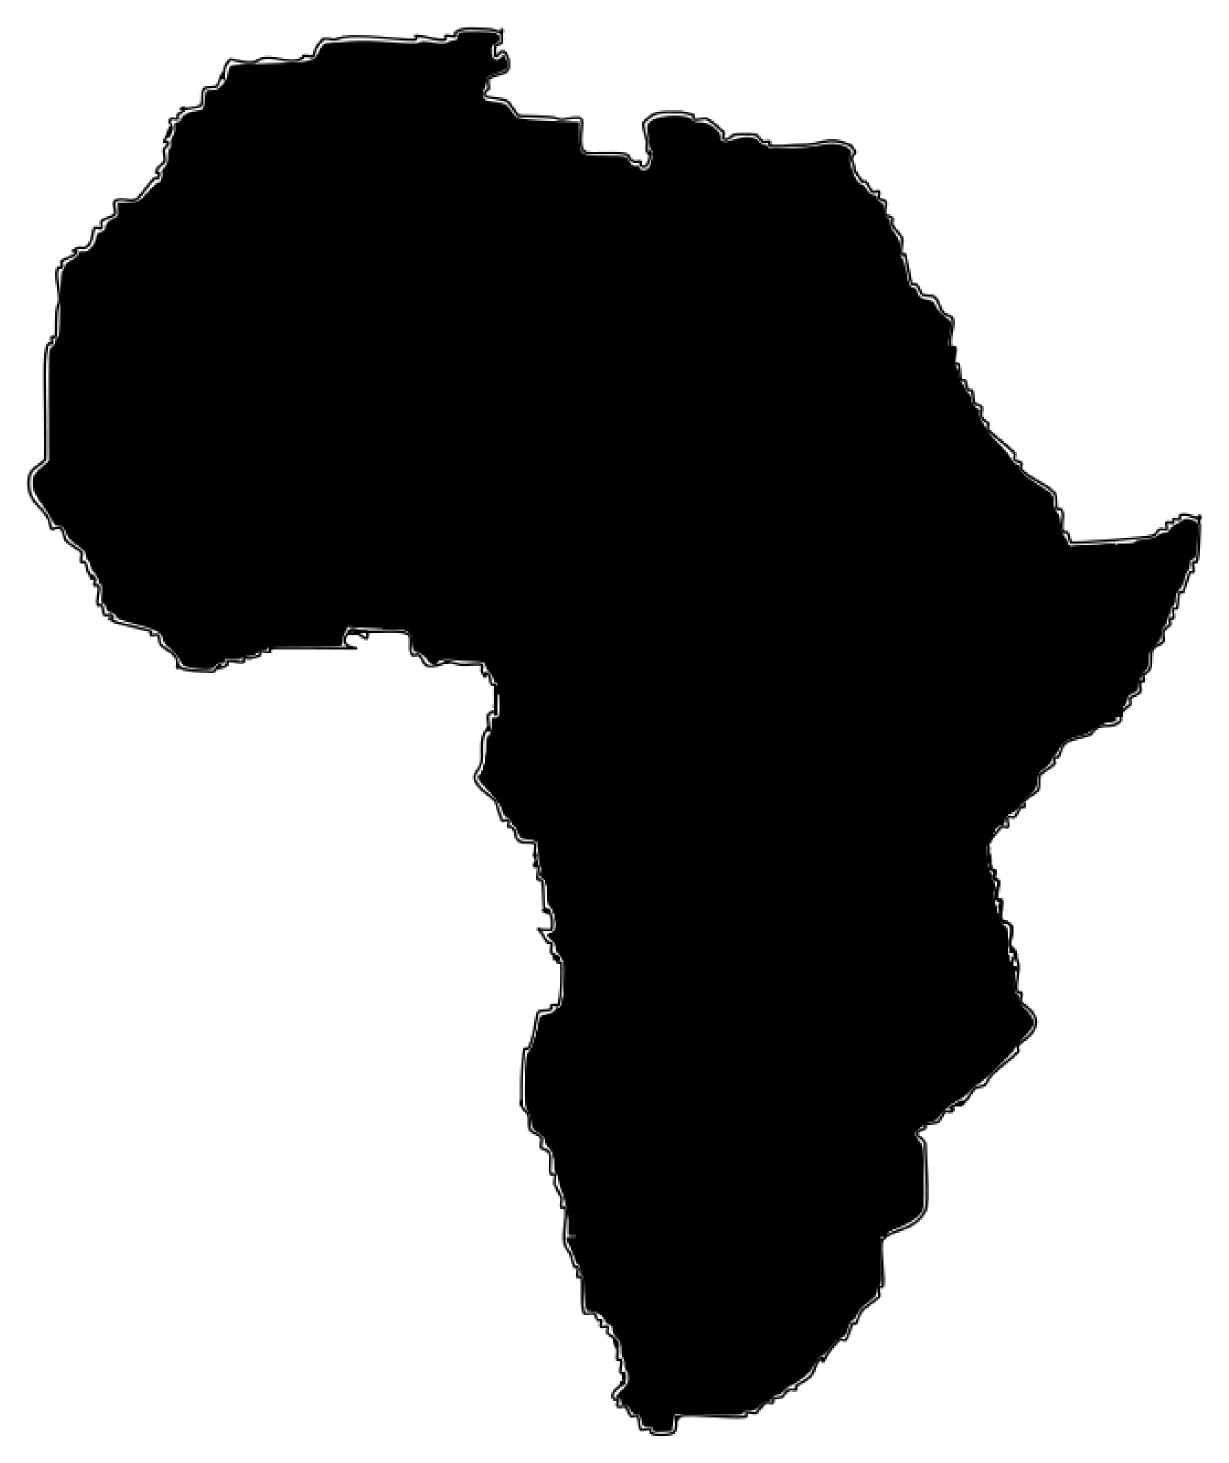 africa clipart map - photo #15